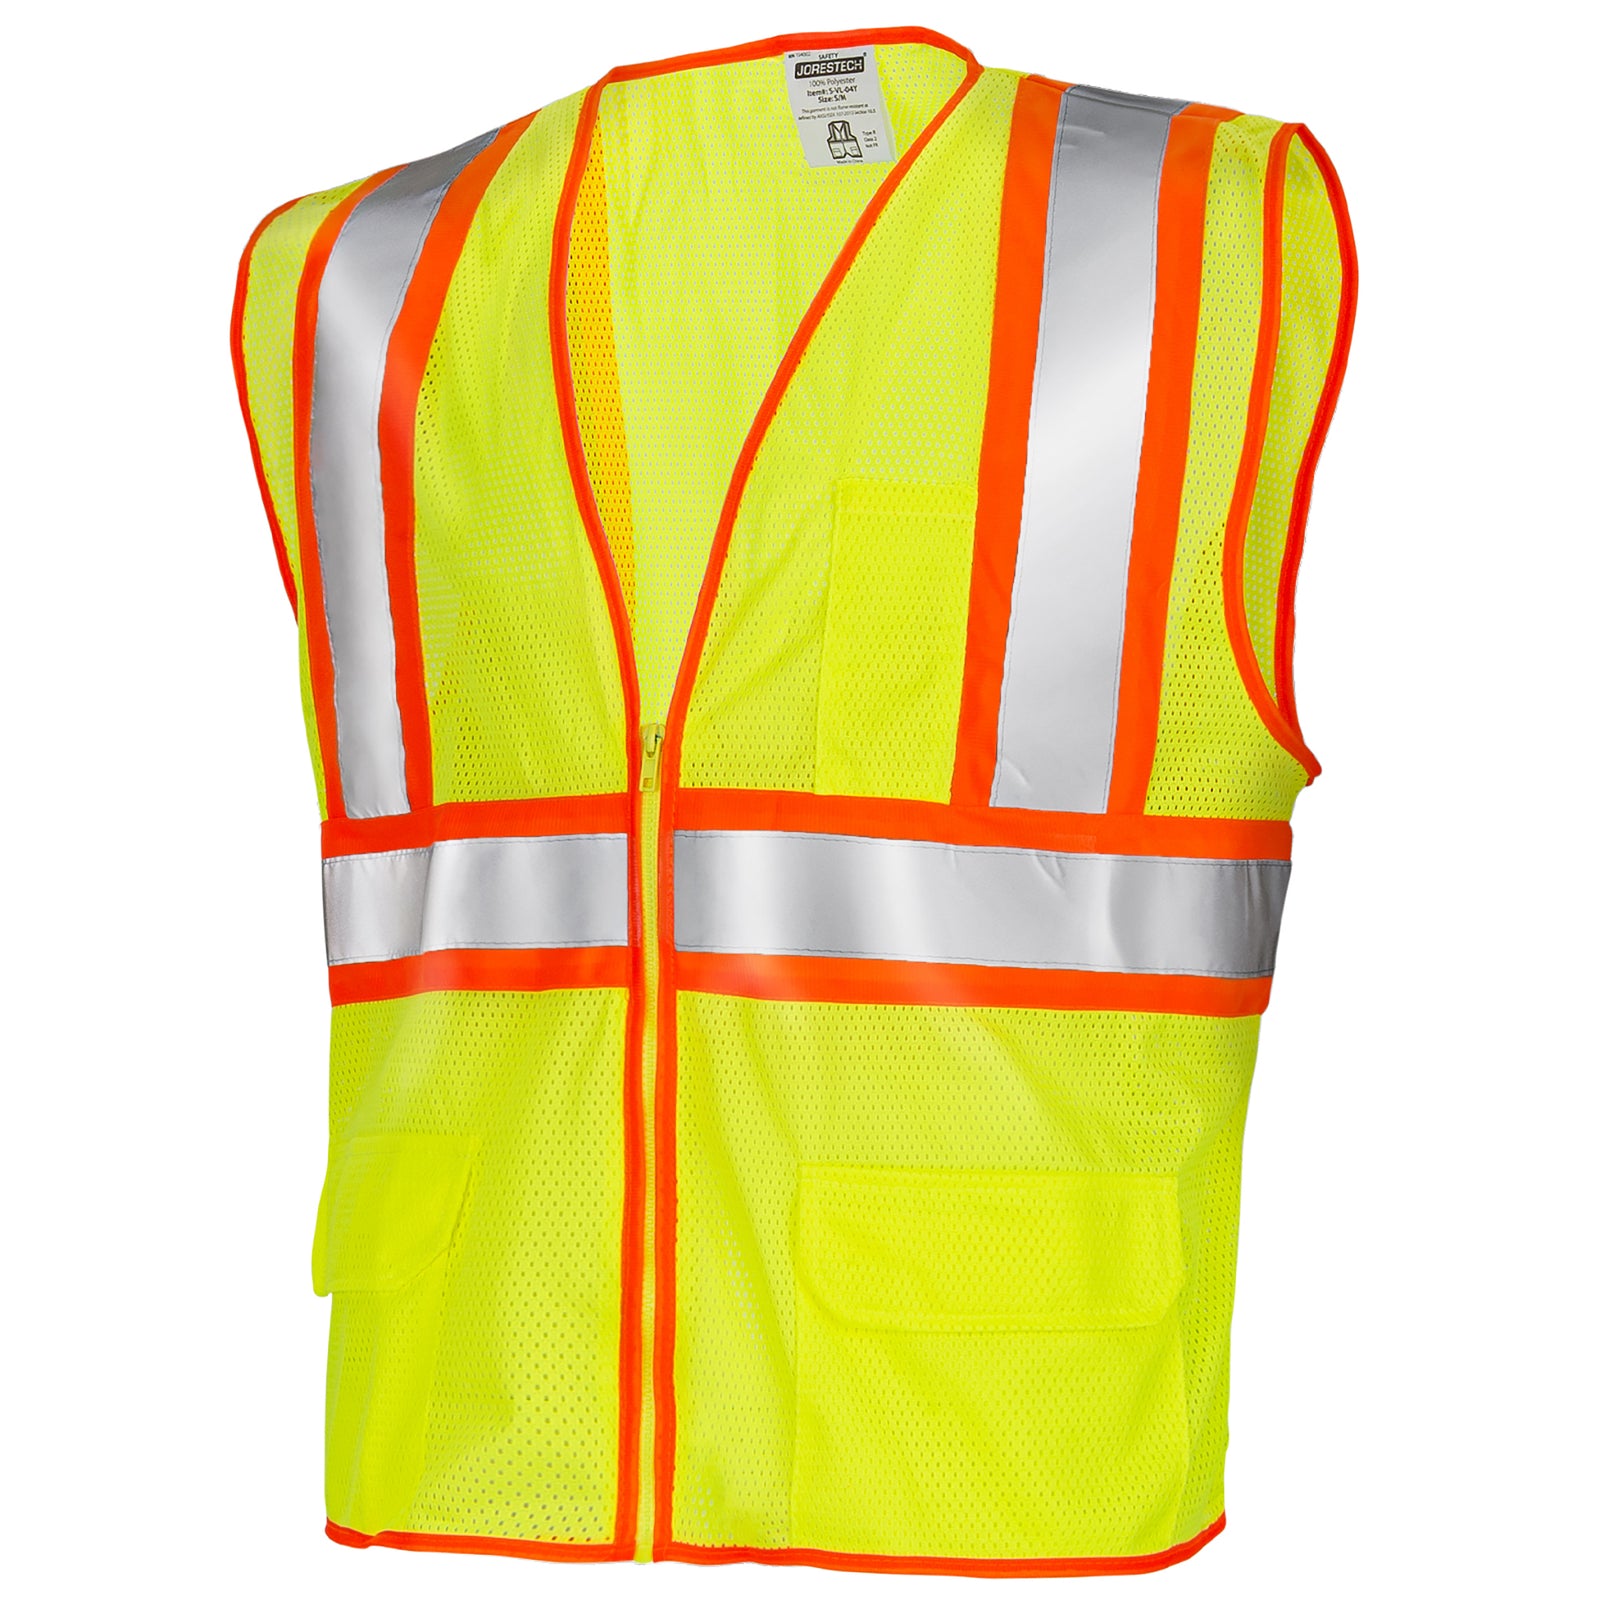 Two-Tone Reflective Safety Vest with Pockets